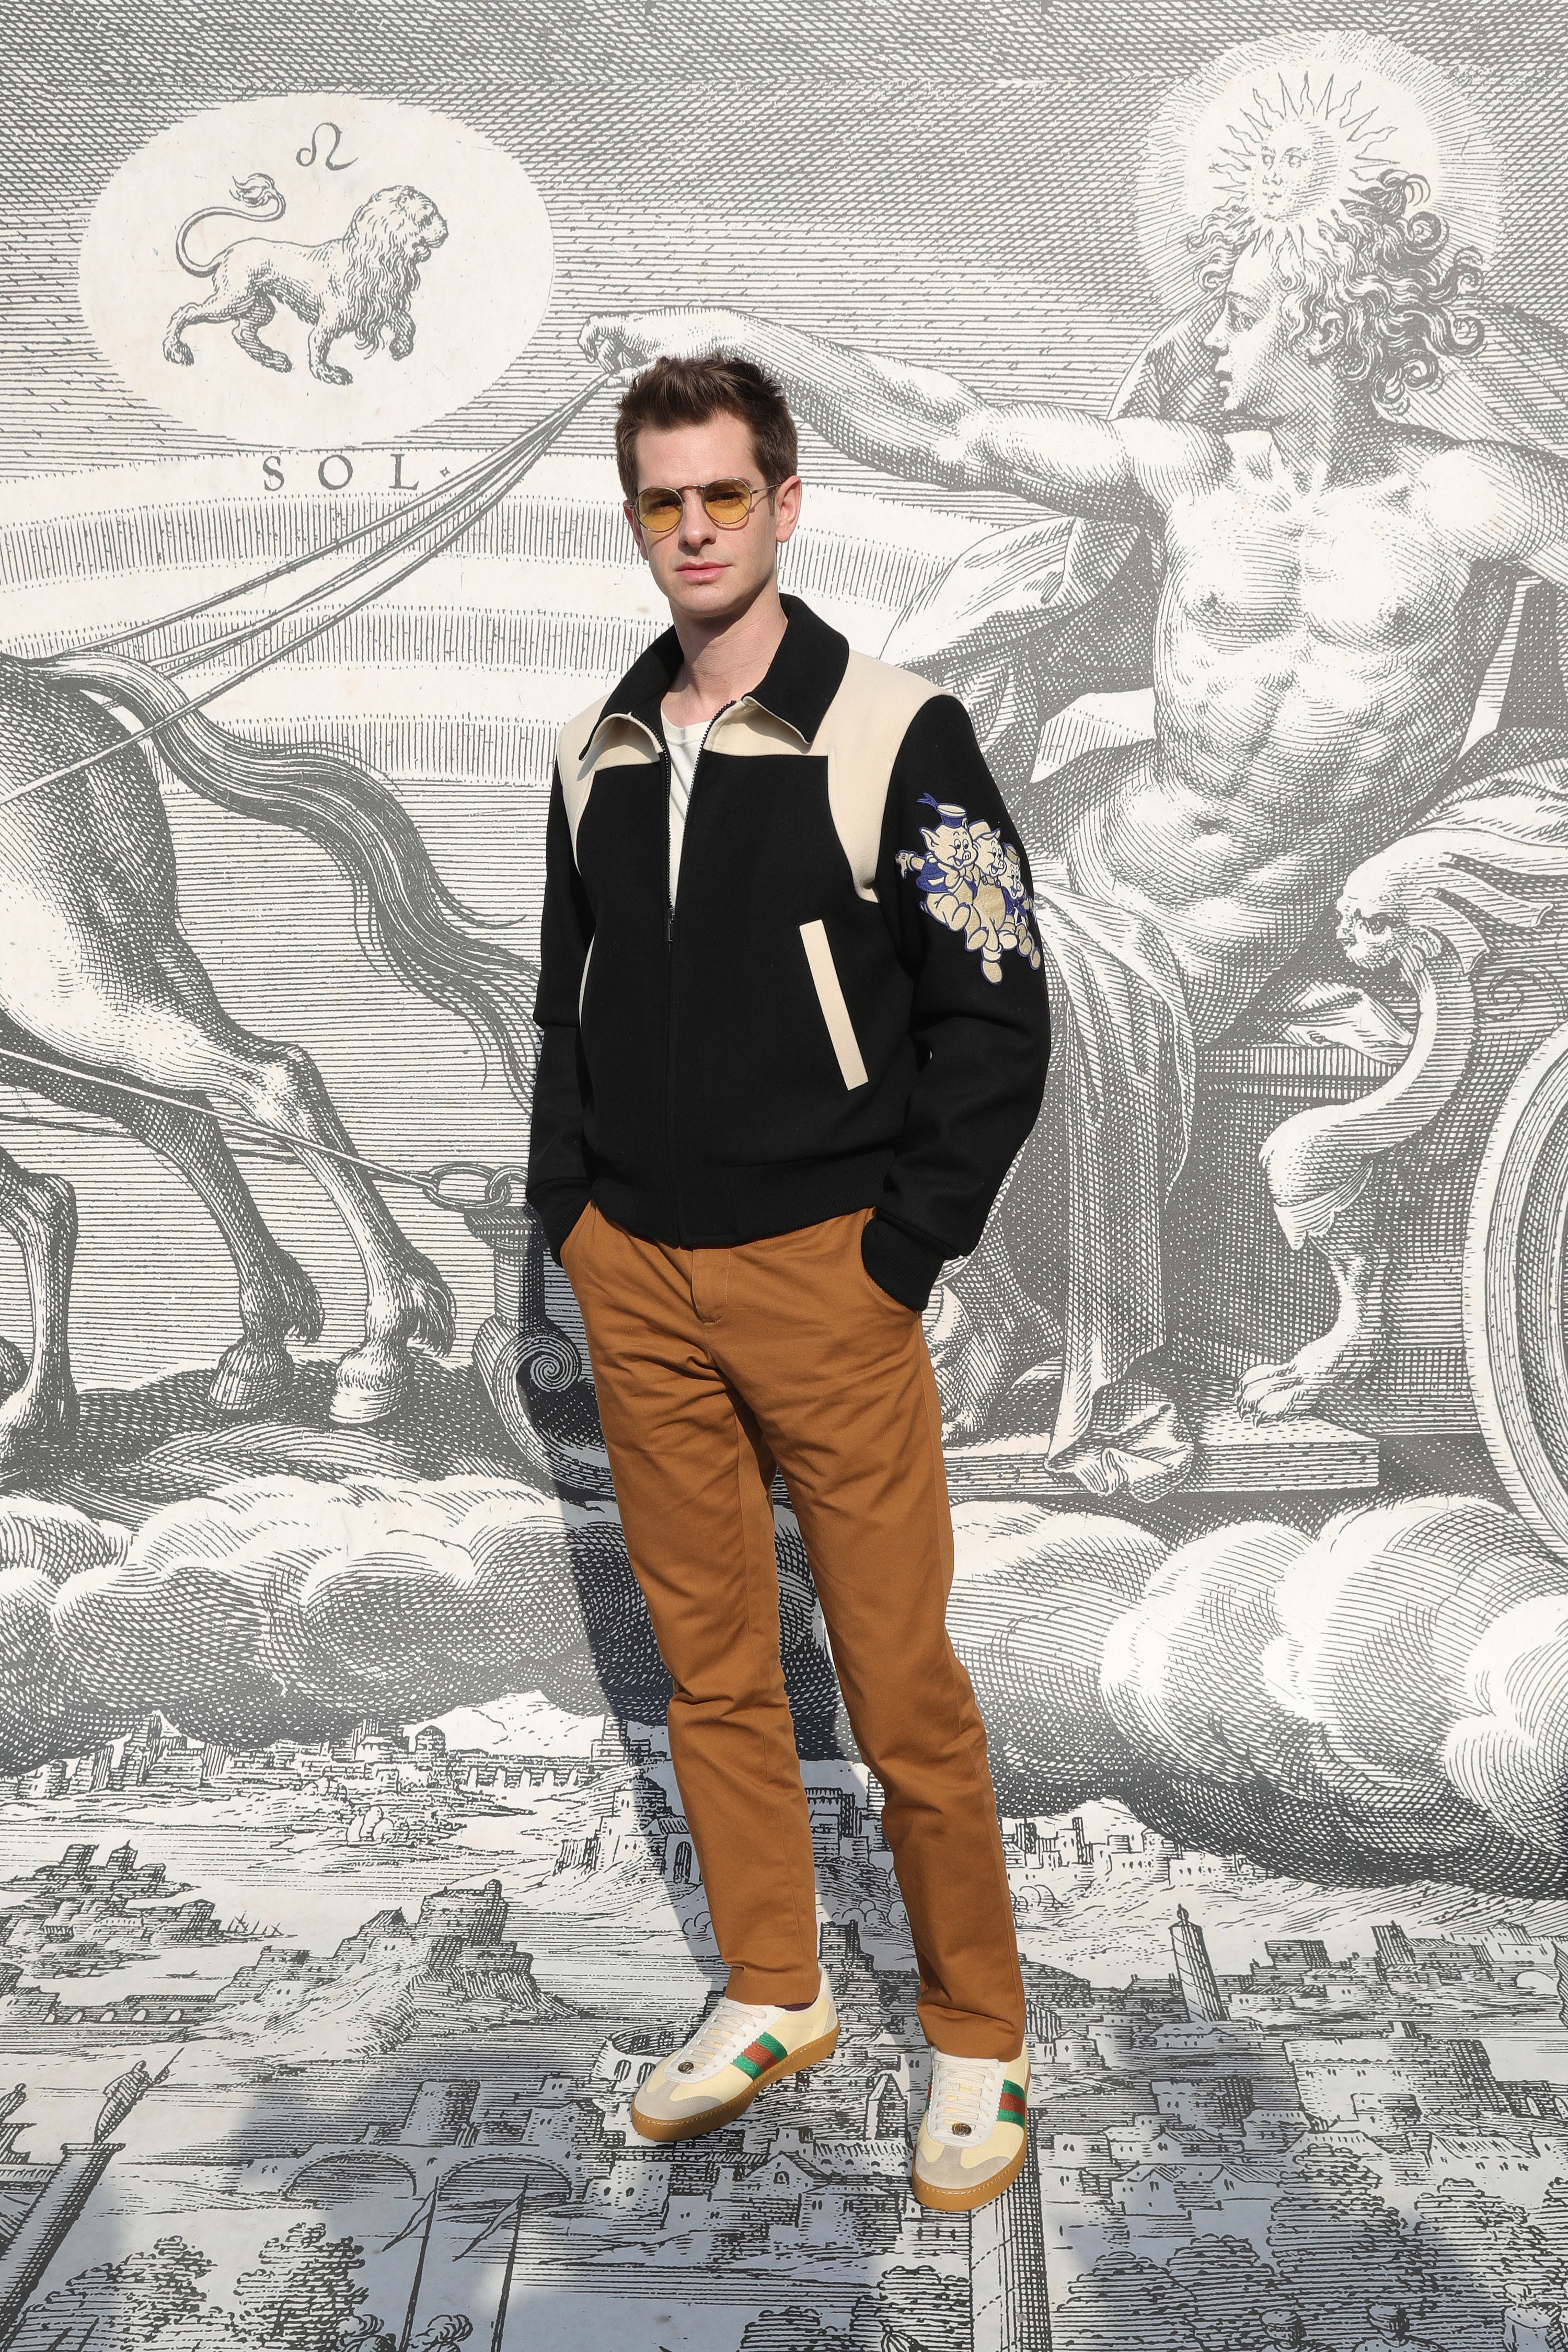 Andrew wears beige pants and a black and white bomber jacket